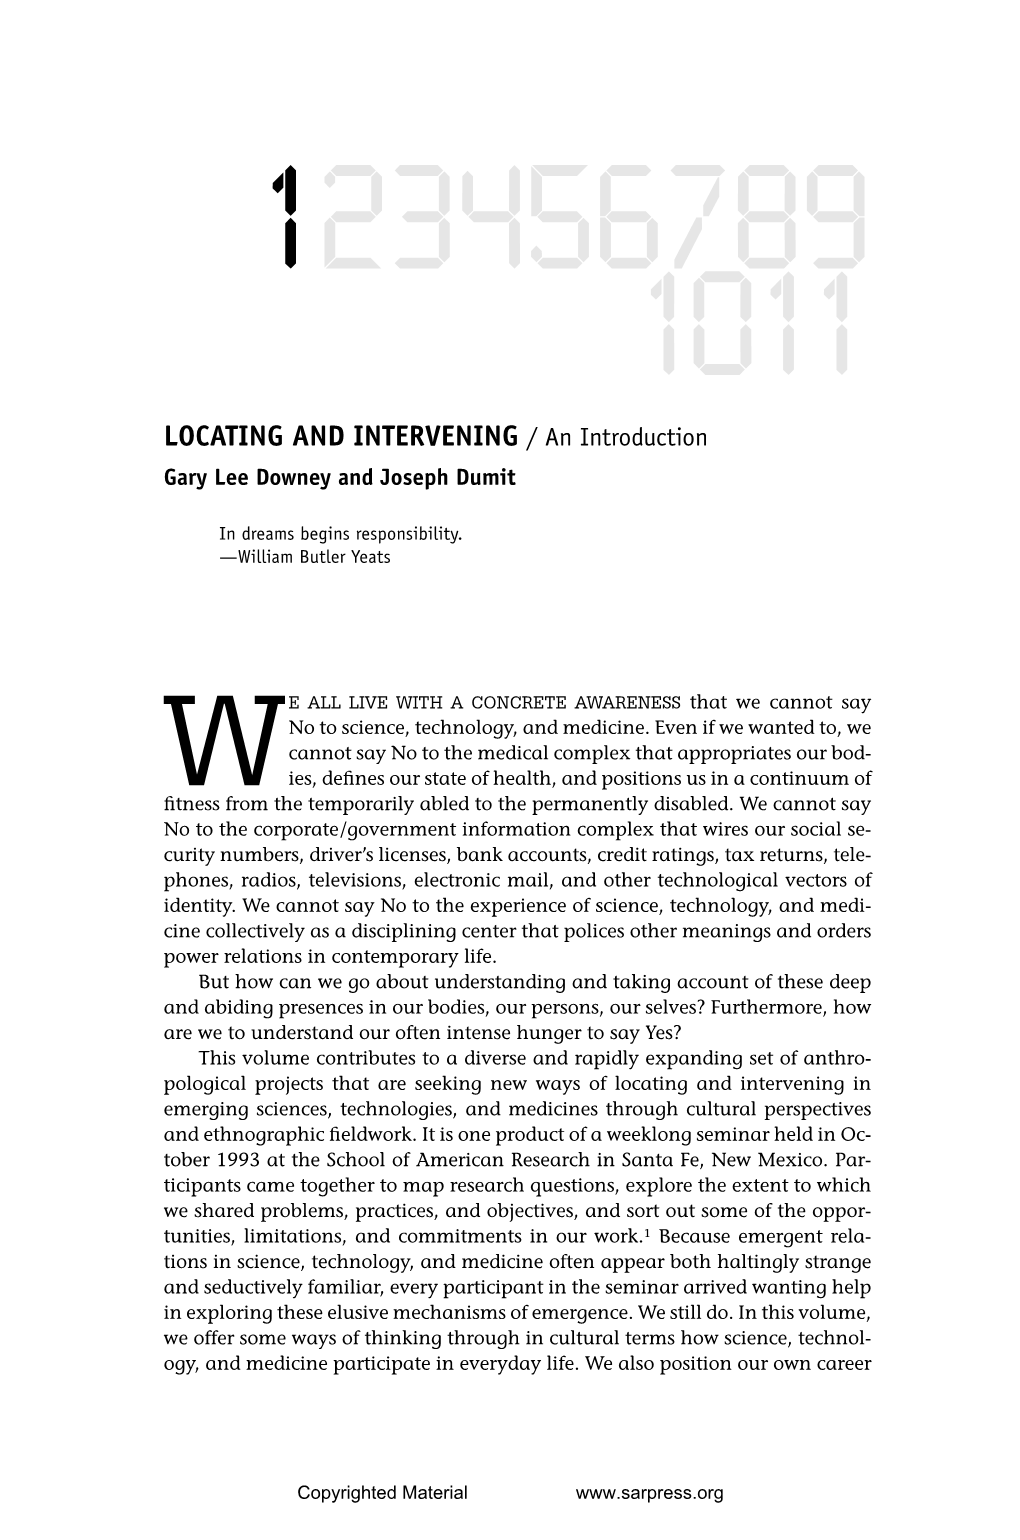 LOCATING and INTERVENING / an Introduction Gary Lee Downey and Joseph Dumit